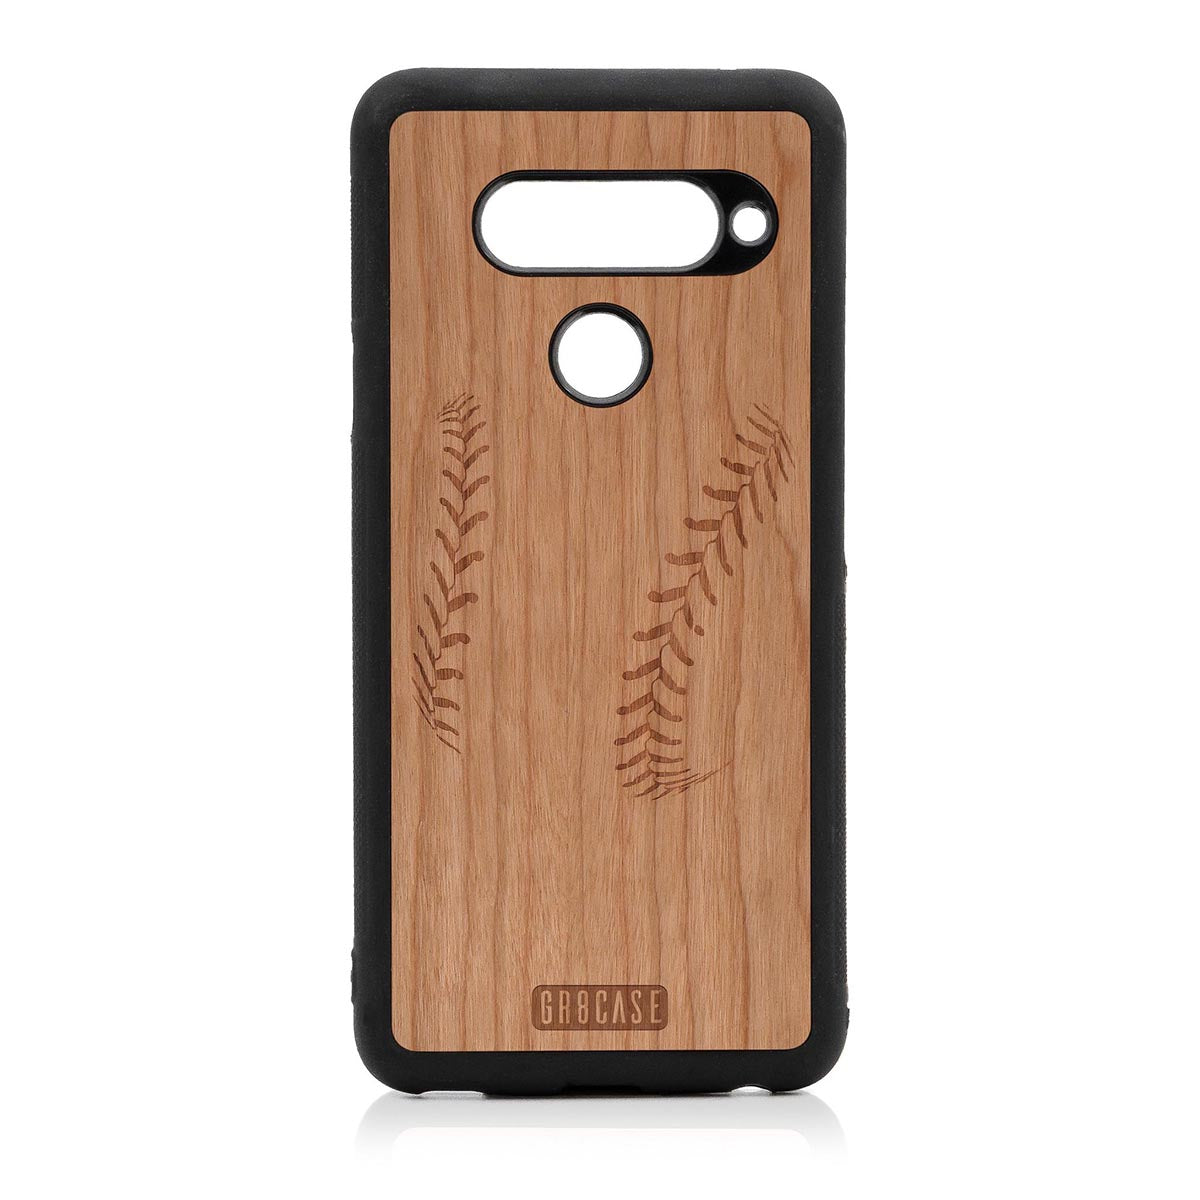 Baseball Stitches Design Wood Case For LG V40 ThinQ by GR8CASE